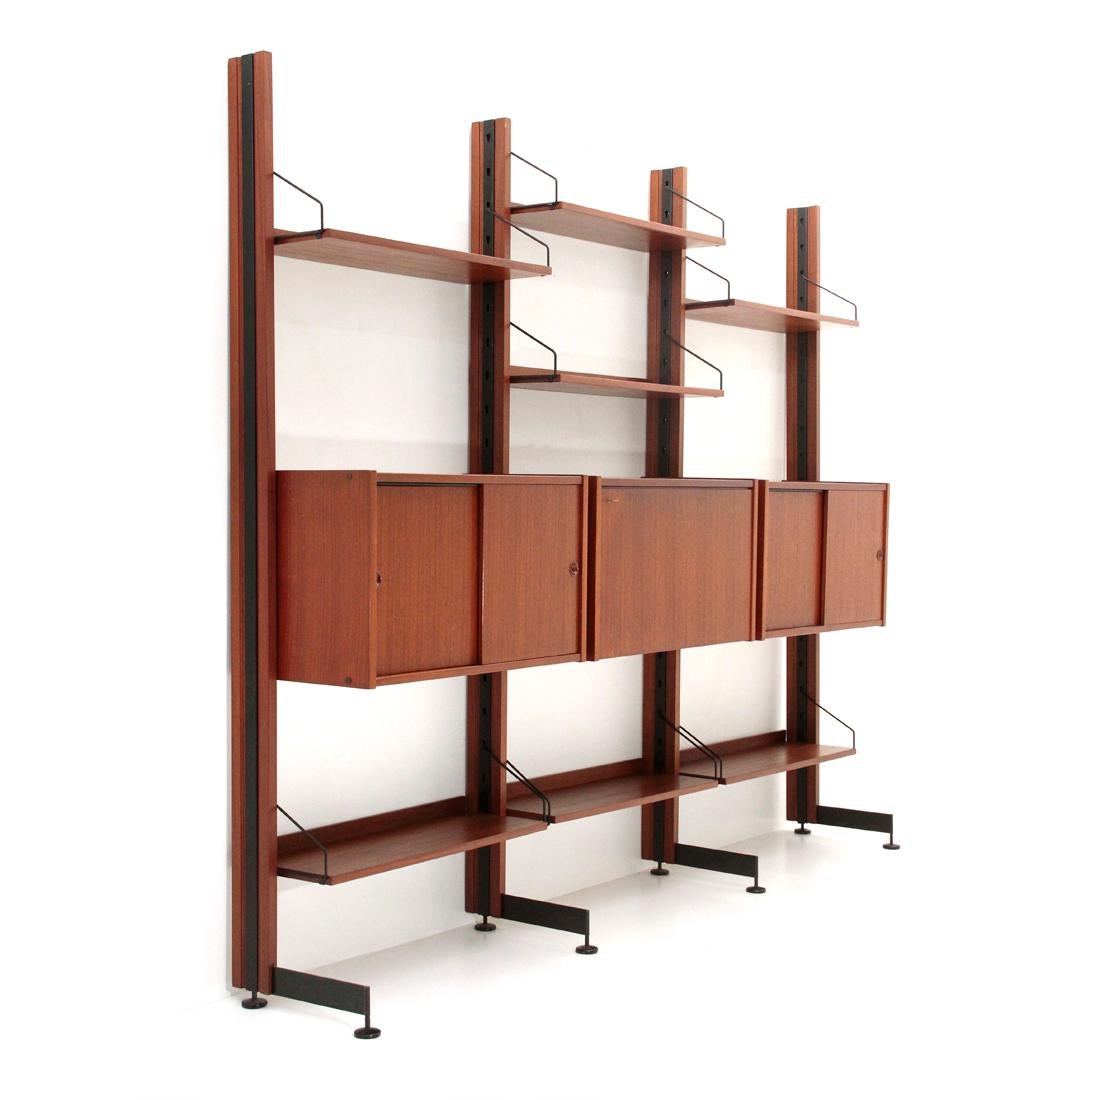 Model Selex wall unit produced by Industrial Mobili Barovero in the 1960s.
Uprights in black painted metal and teak.
Adjustable feet in black painted metal.
Shelves in teak veneered wood with black painted metal supports.
Container modules with